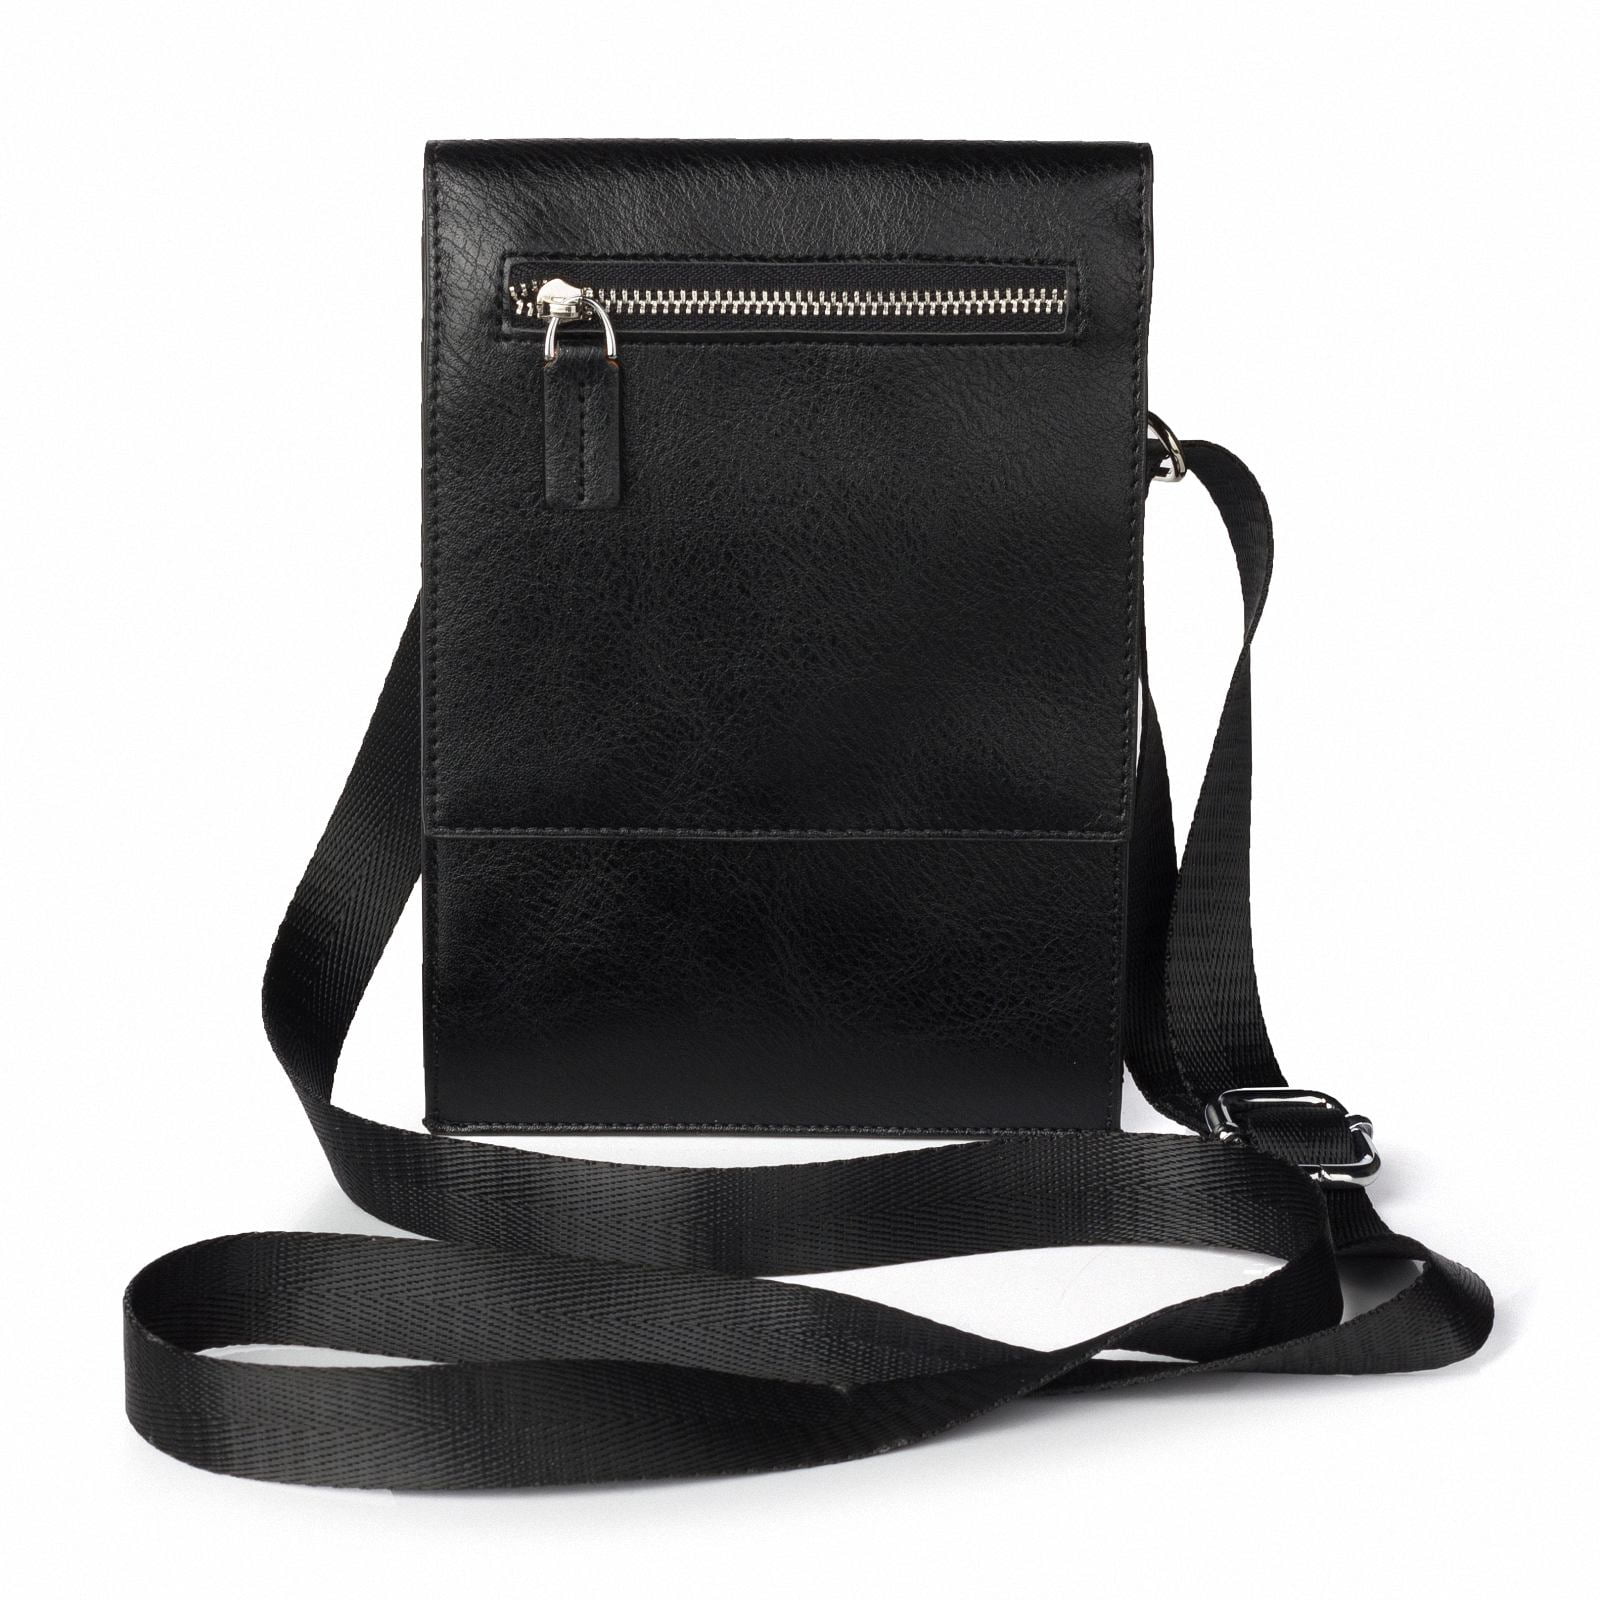 Leather Crossbody Bag Purse With Zipper Small Shoulder Bag 